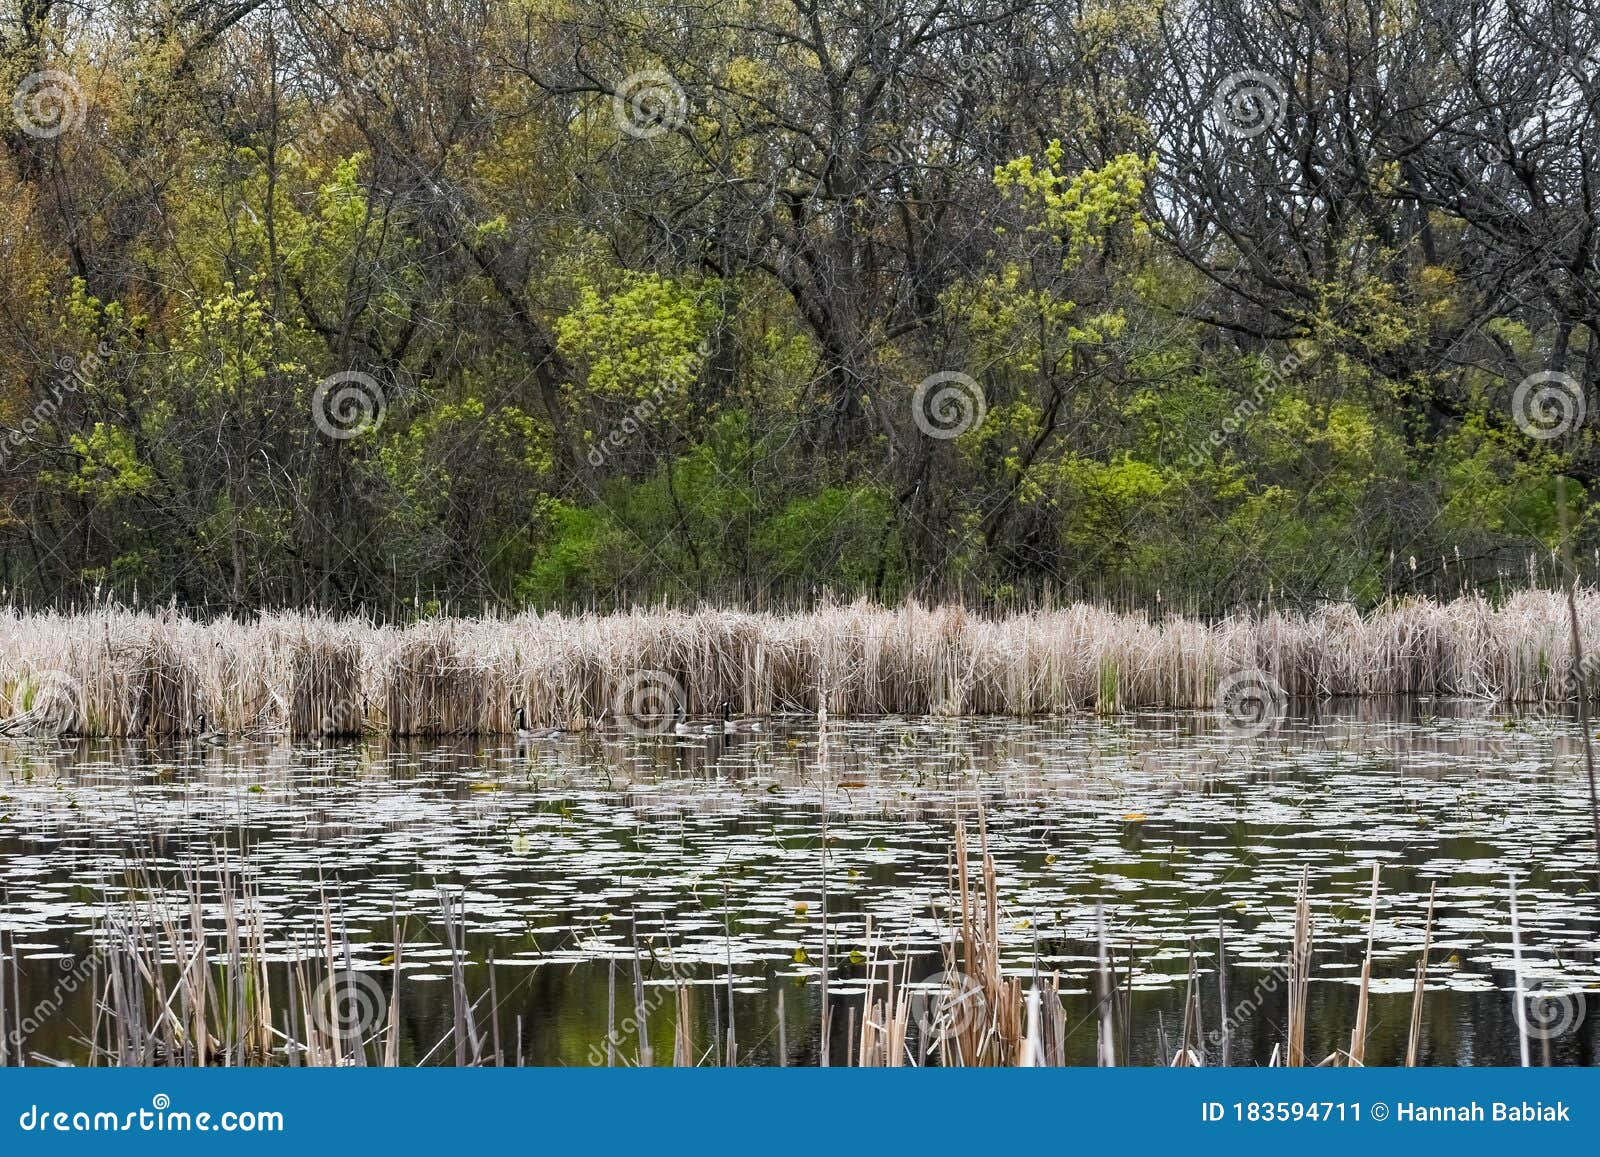 swampy part of lake with lily pads and cattails